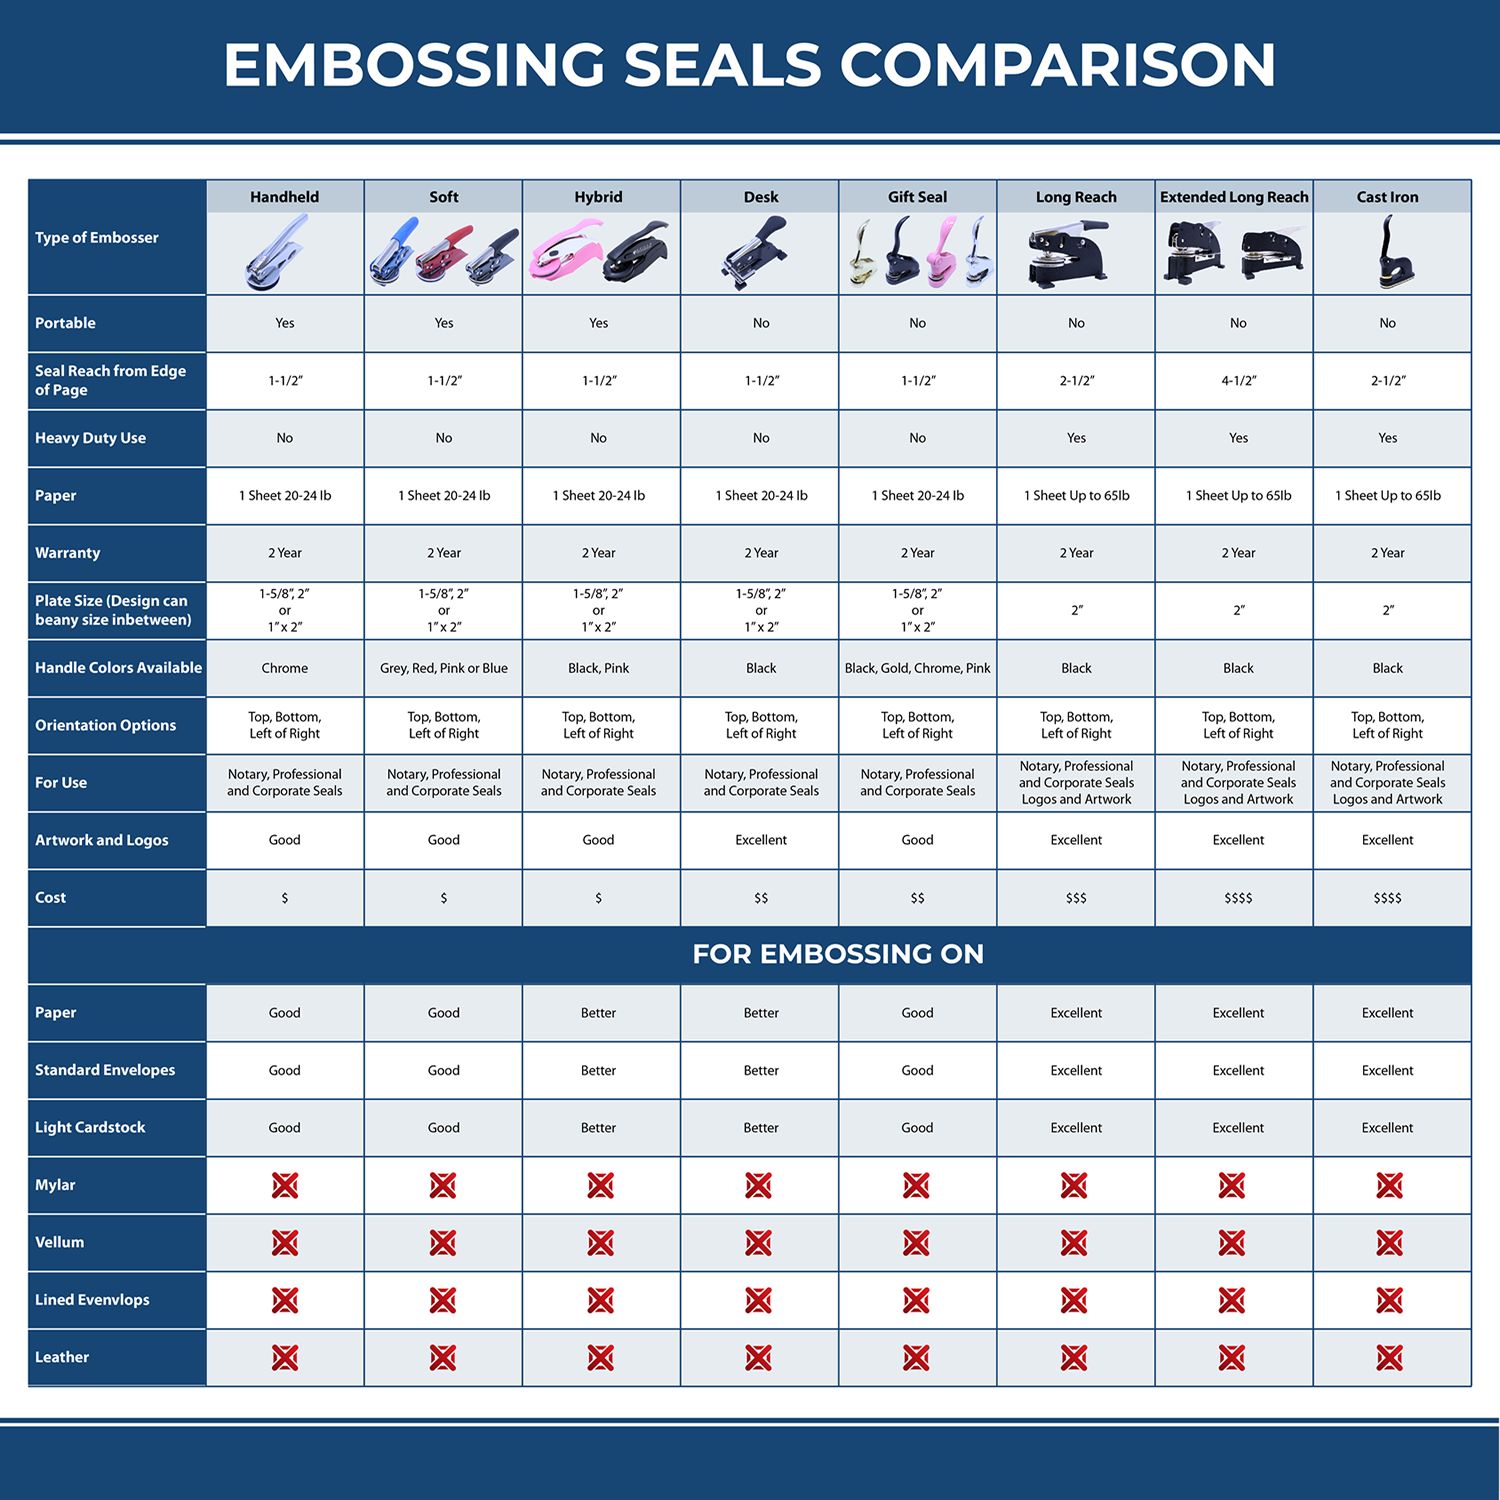 A comparison chart for the different types of mount models available for the Soft Oregon Professional Engineer Seal.